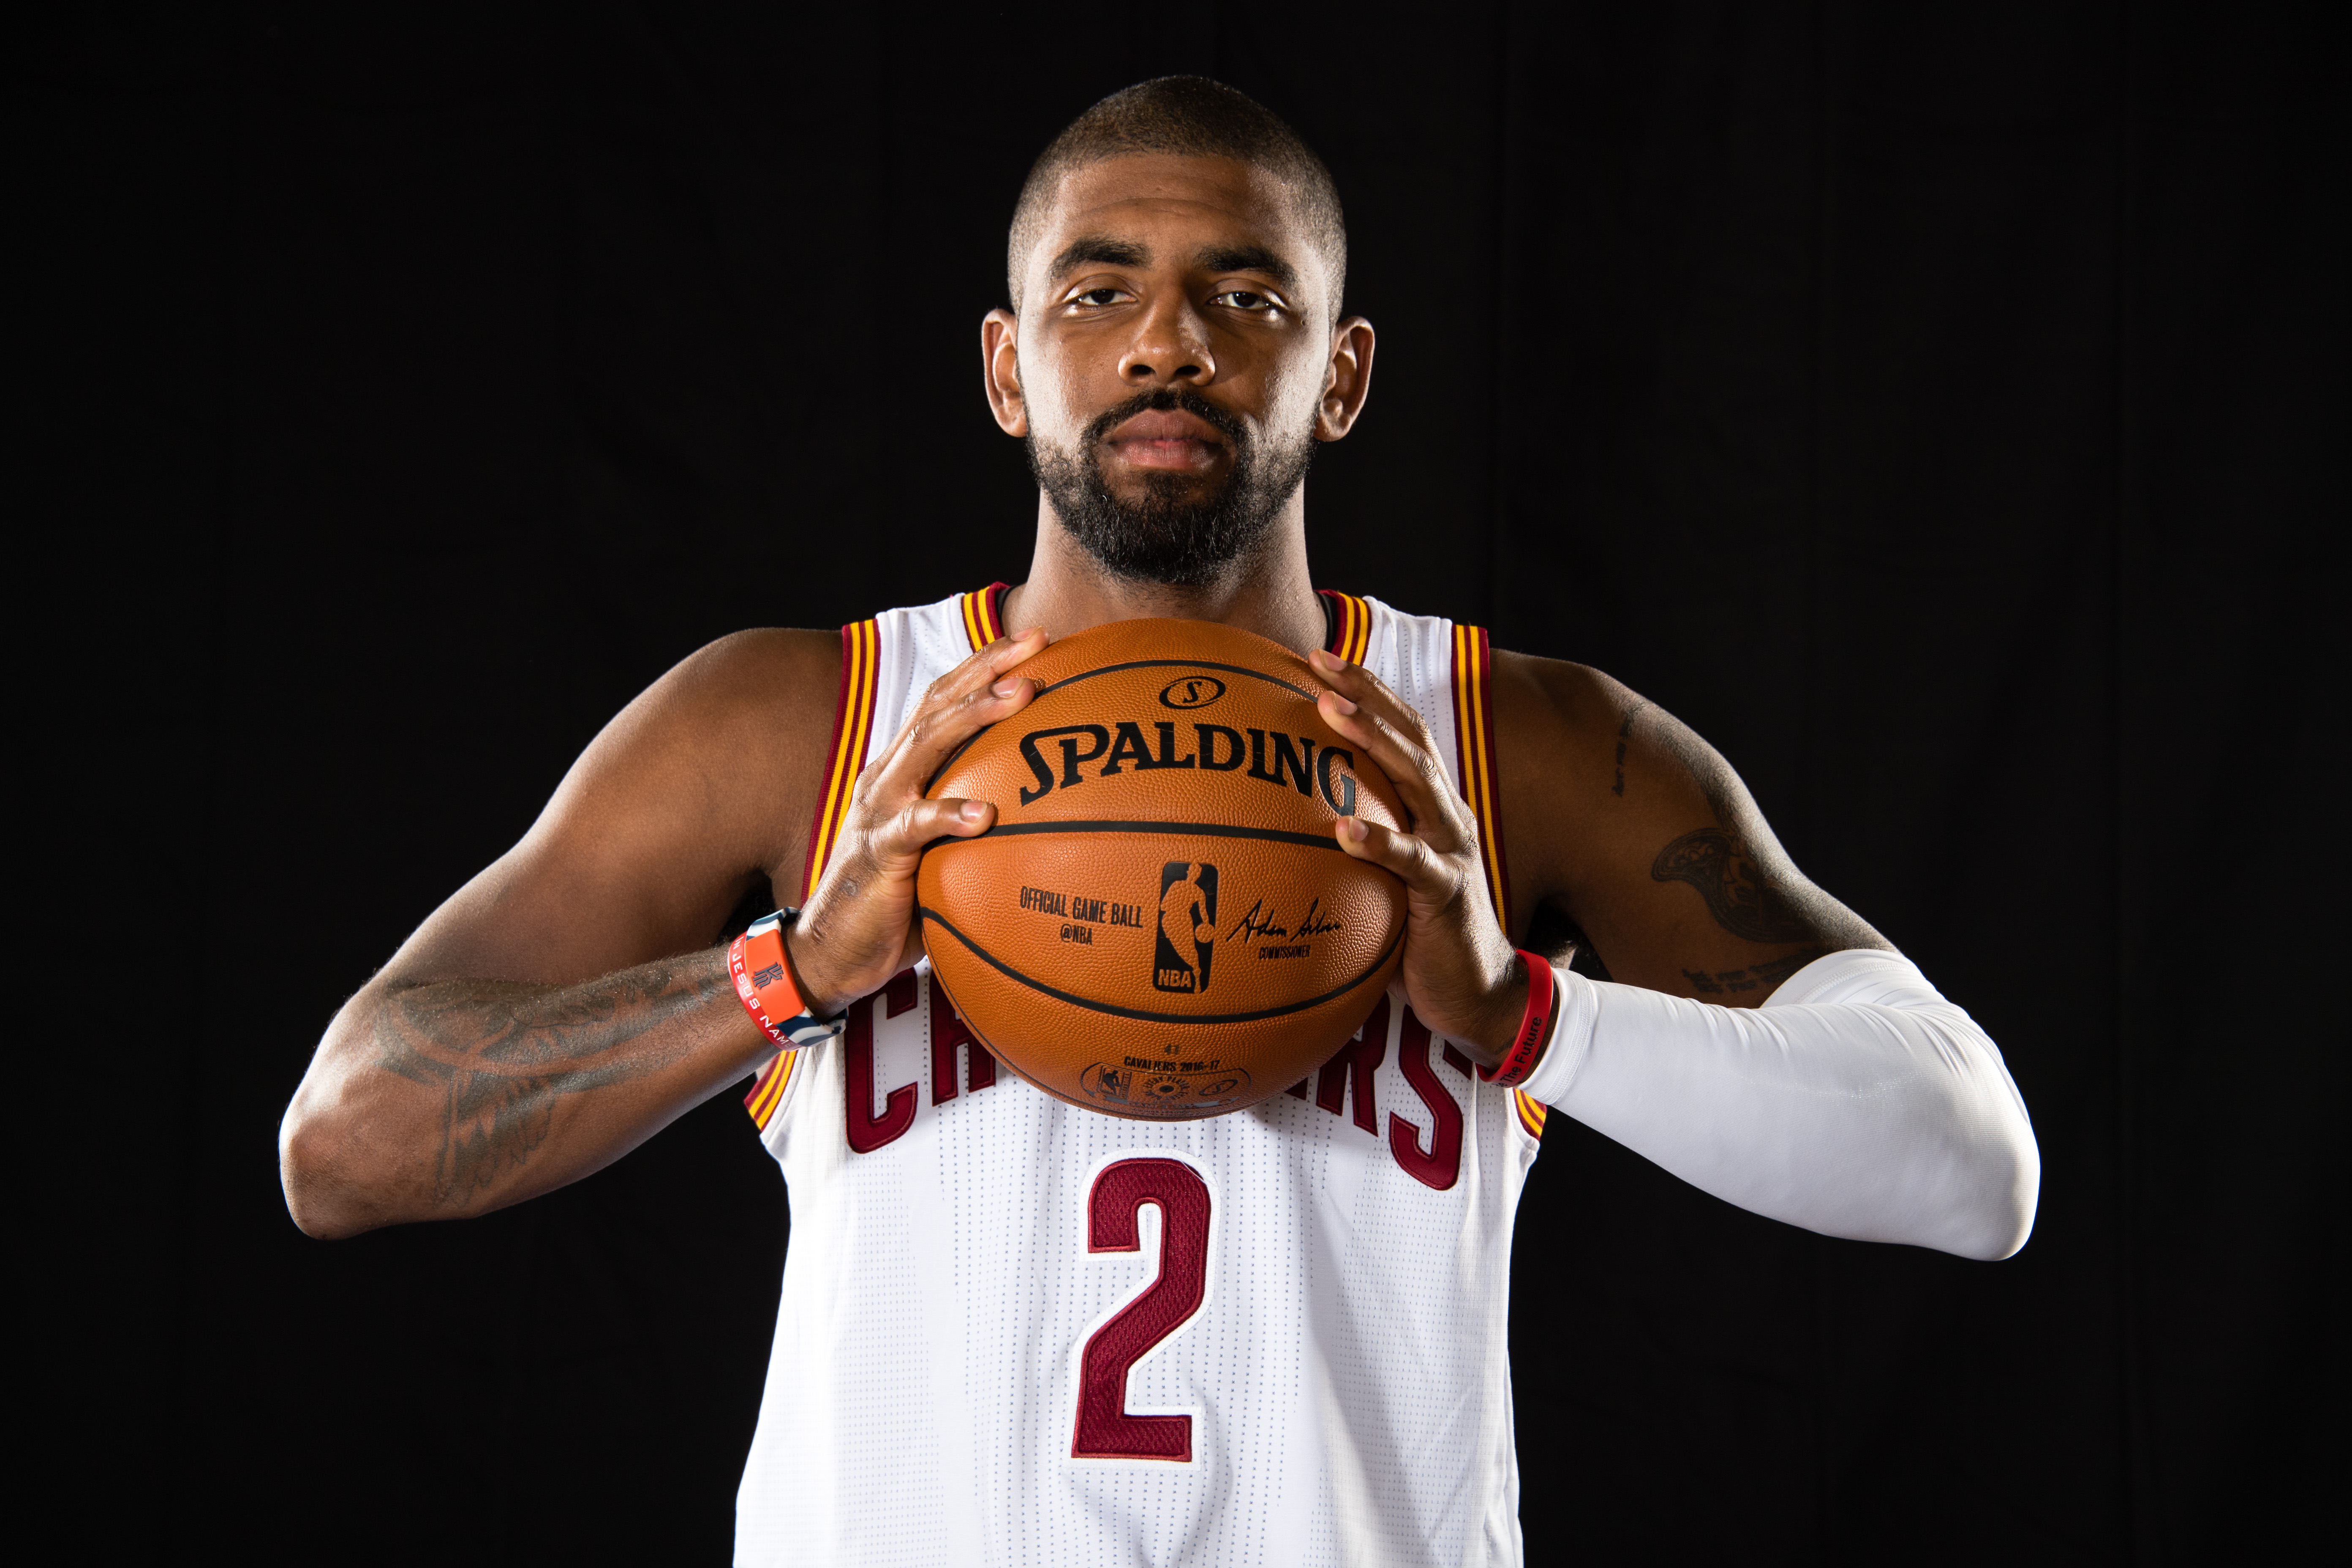 CLEVELAND, OH - SEPTEMBER 26: Kyrie Irving #2 of the Cleveland Cavaliers during media day at Cleveland Clinic Courts on September 26, 2016 in Cleveland, Ohio. NOTE TO USER: User expressly acknowledges and agrees that, by downloading and/or using this photograph, user is consenting to the terms and conditions of the Getty Images License Agreement. Mandatory copyright notice.   Jason Miller/Getty Images/AFP